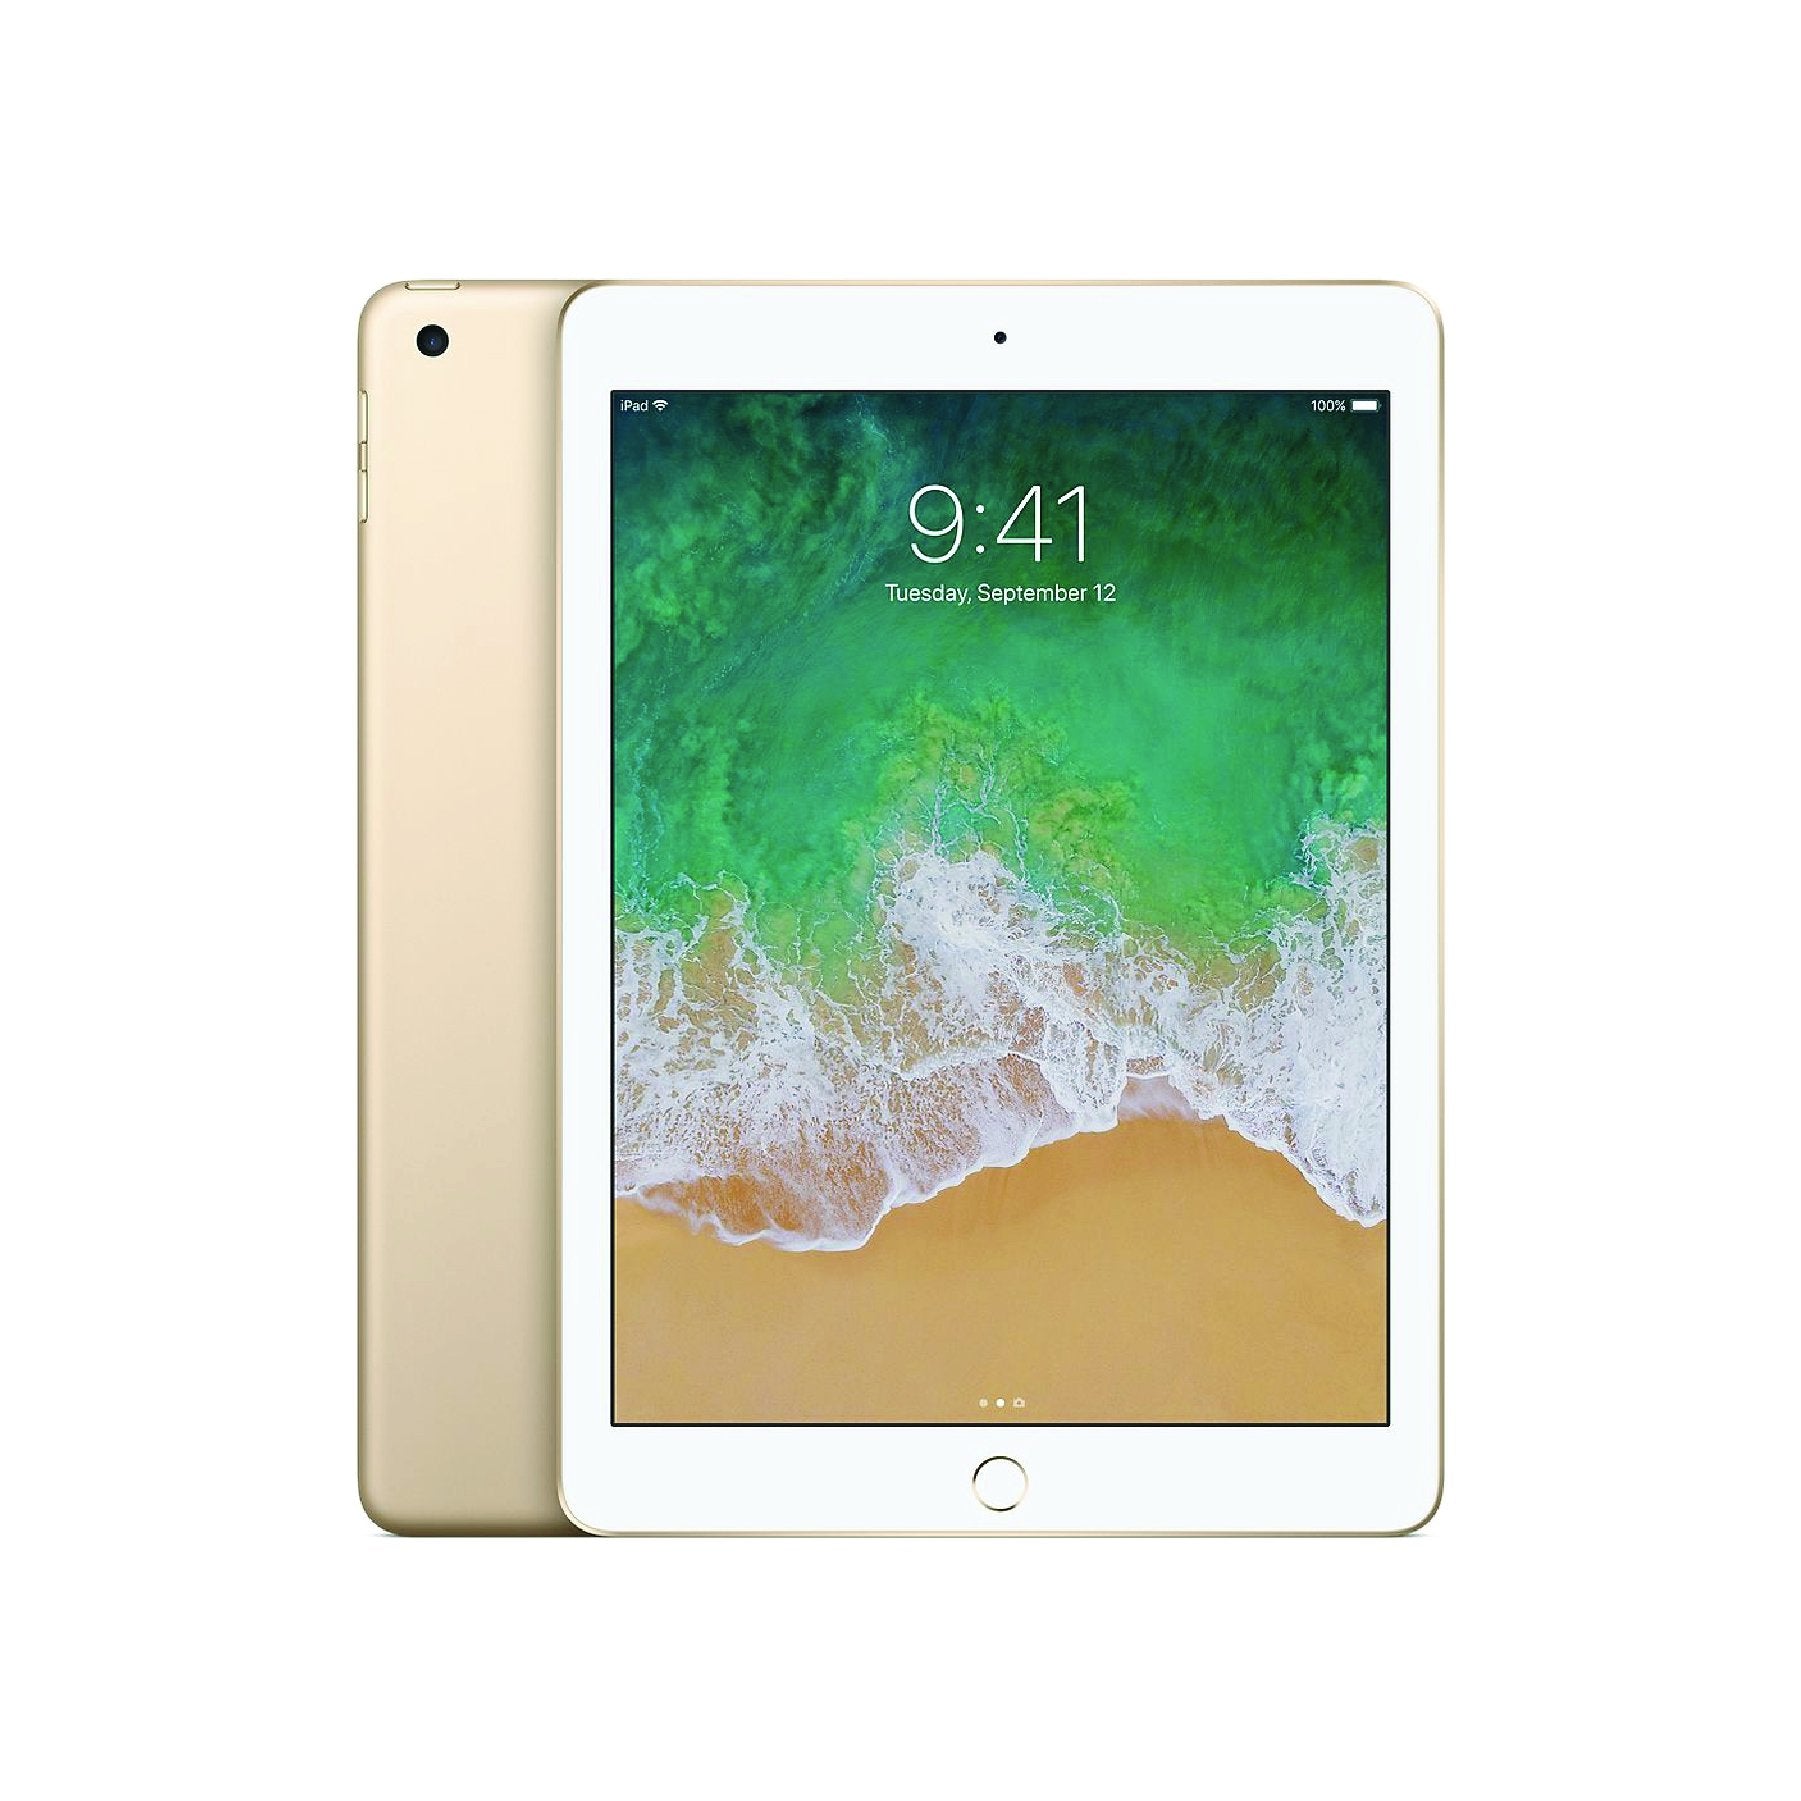 iPad Pro (9.7-inch, 2016) Wi-Fi + Cellular - iStore Pre-owned